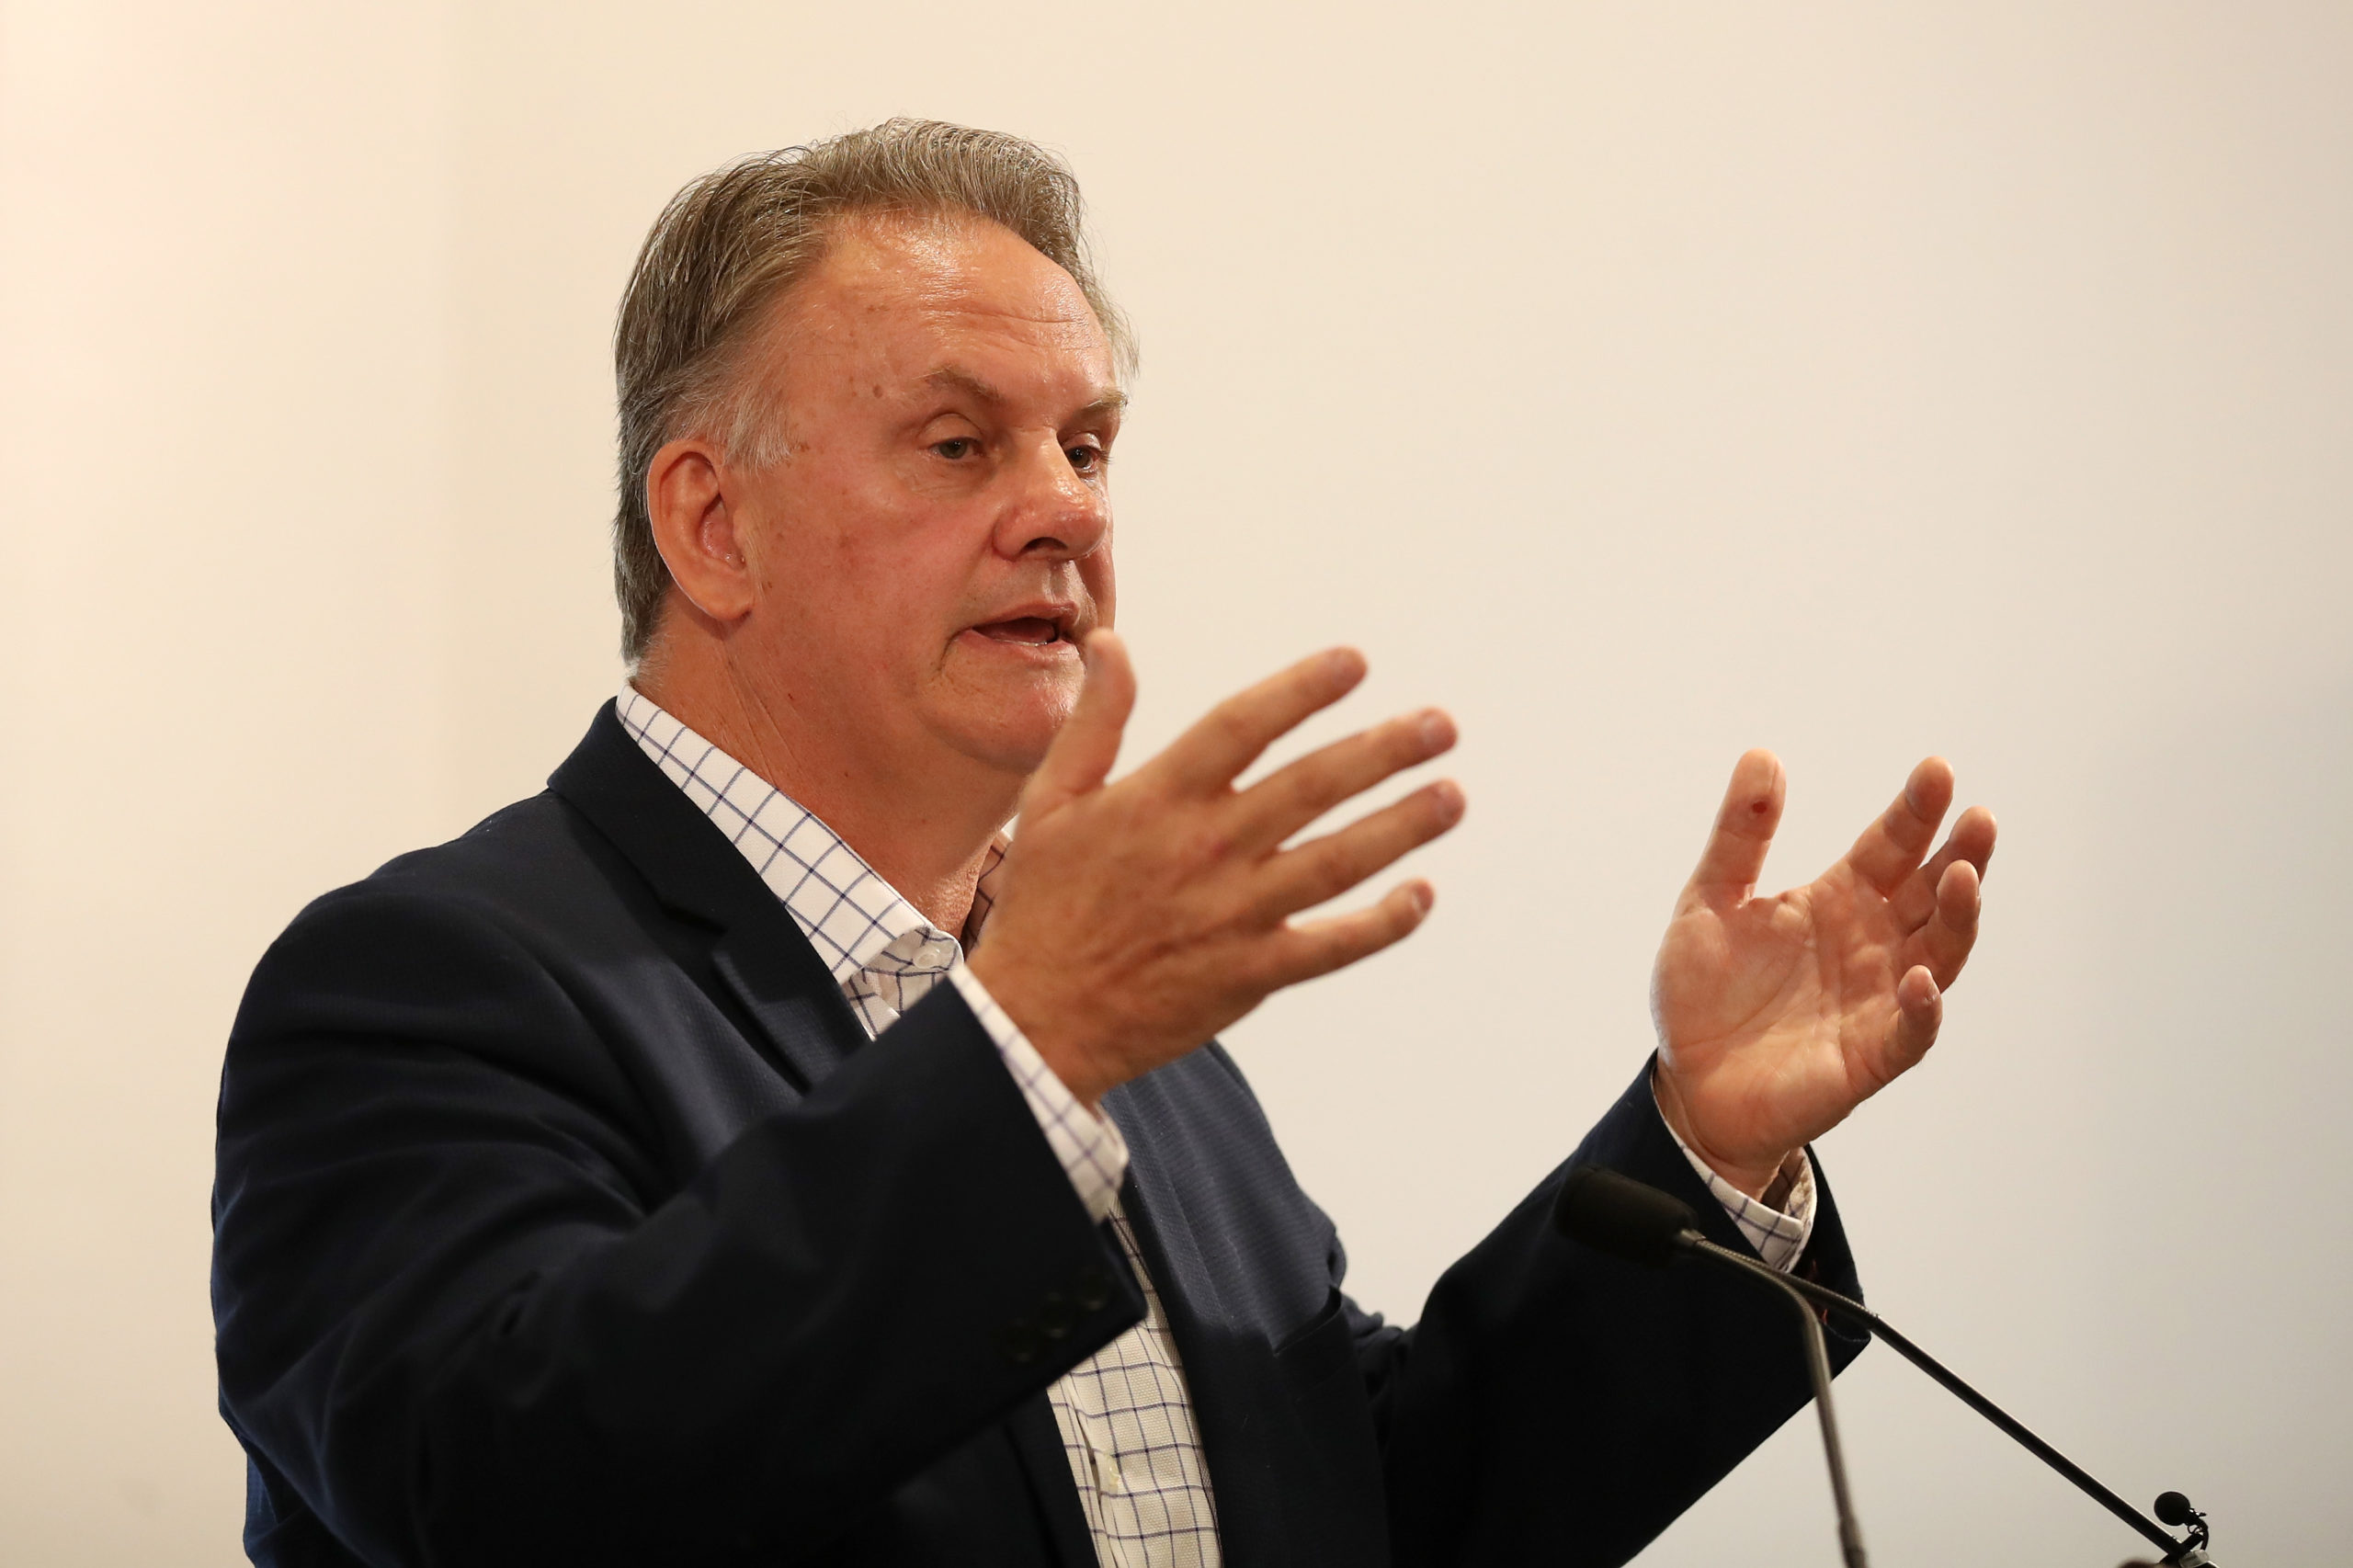 One Nation's Mark Latham is pressing a bill to outlaw 'promotion' of gender ideology